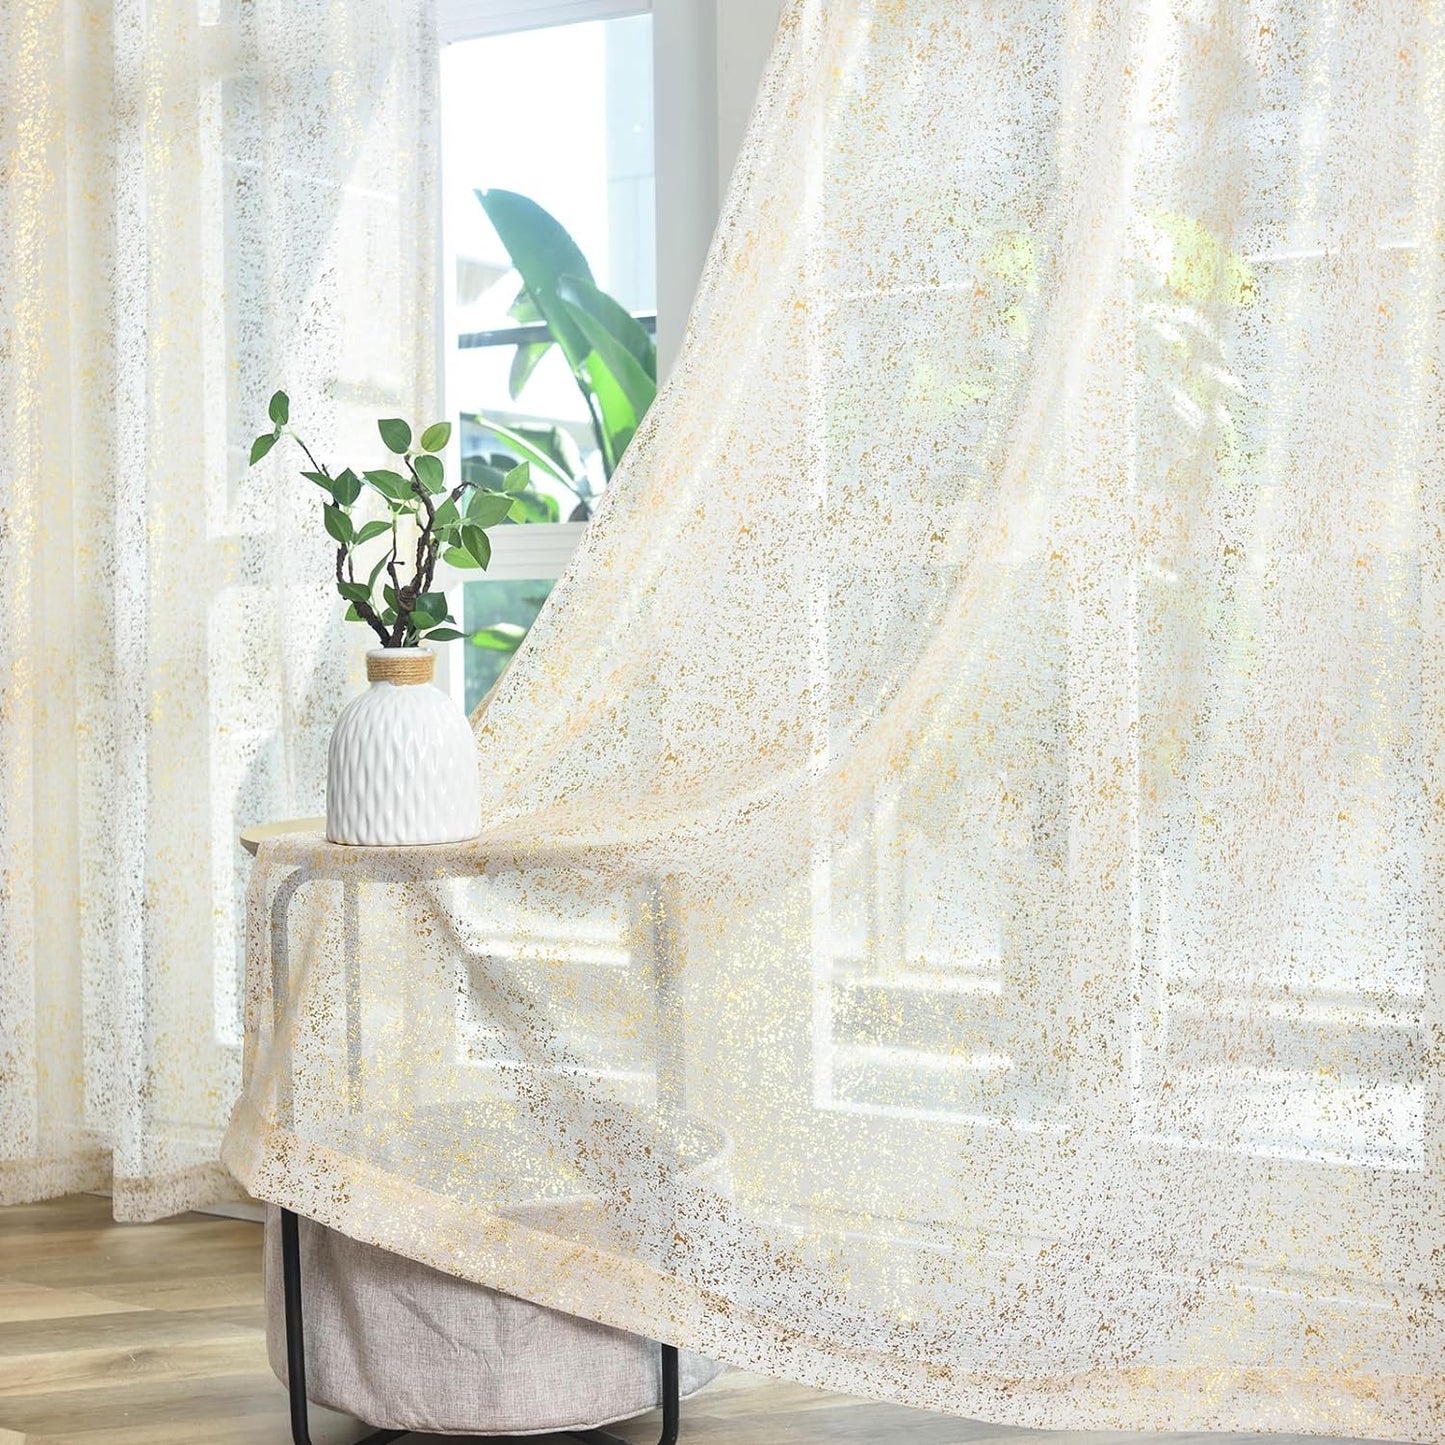 Silver Sheer Curtains 84 Inch Long - Chic Sparkle Curtains for Living Room, Rod Pocket Glitter Sheer Curtains for Windows Privacy Silver Grey Sheer Panels, 52 X 84 Inch, 2 Panels, Silver Gray  TERLYTEX Gold Taupe W52 X L84 Inch|Pair 